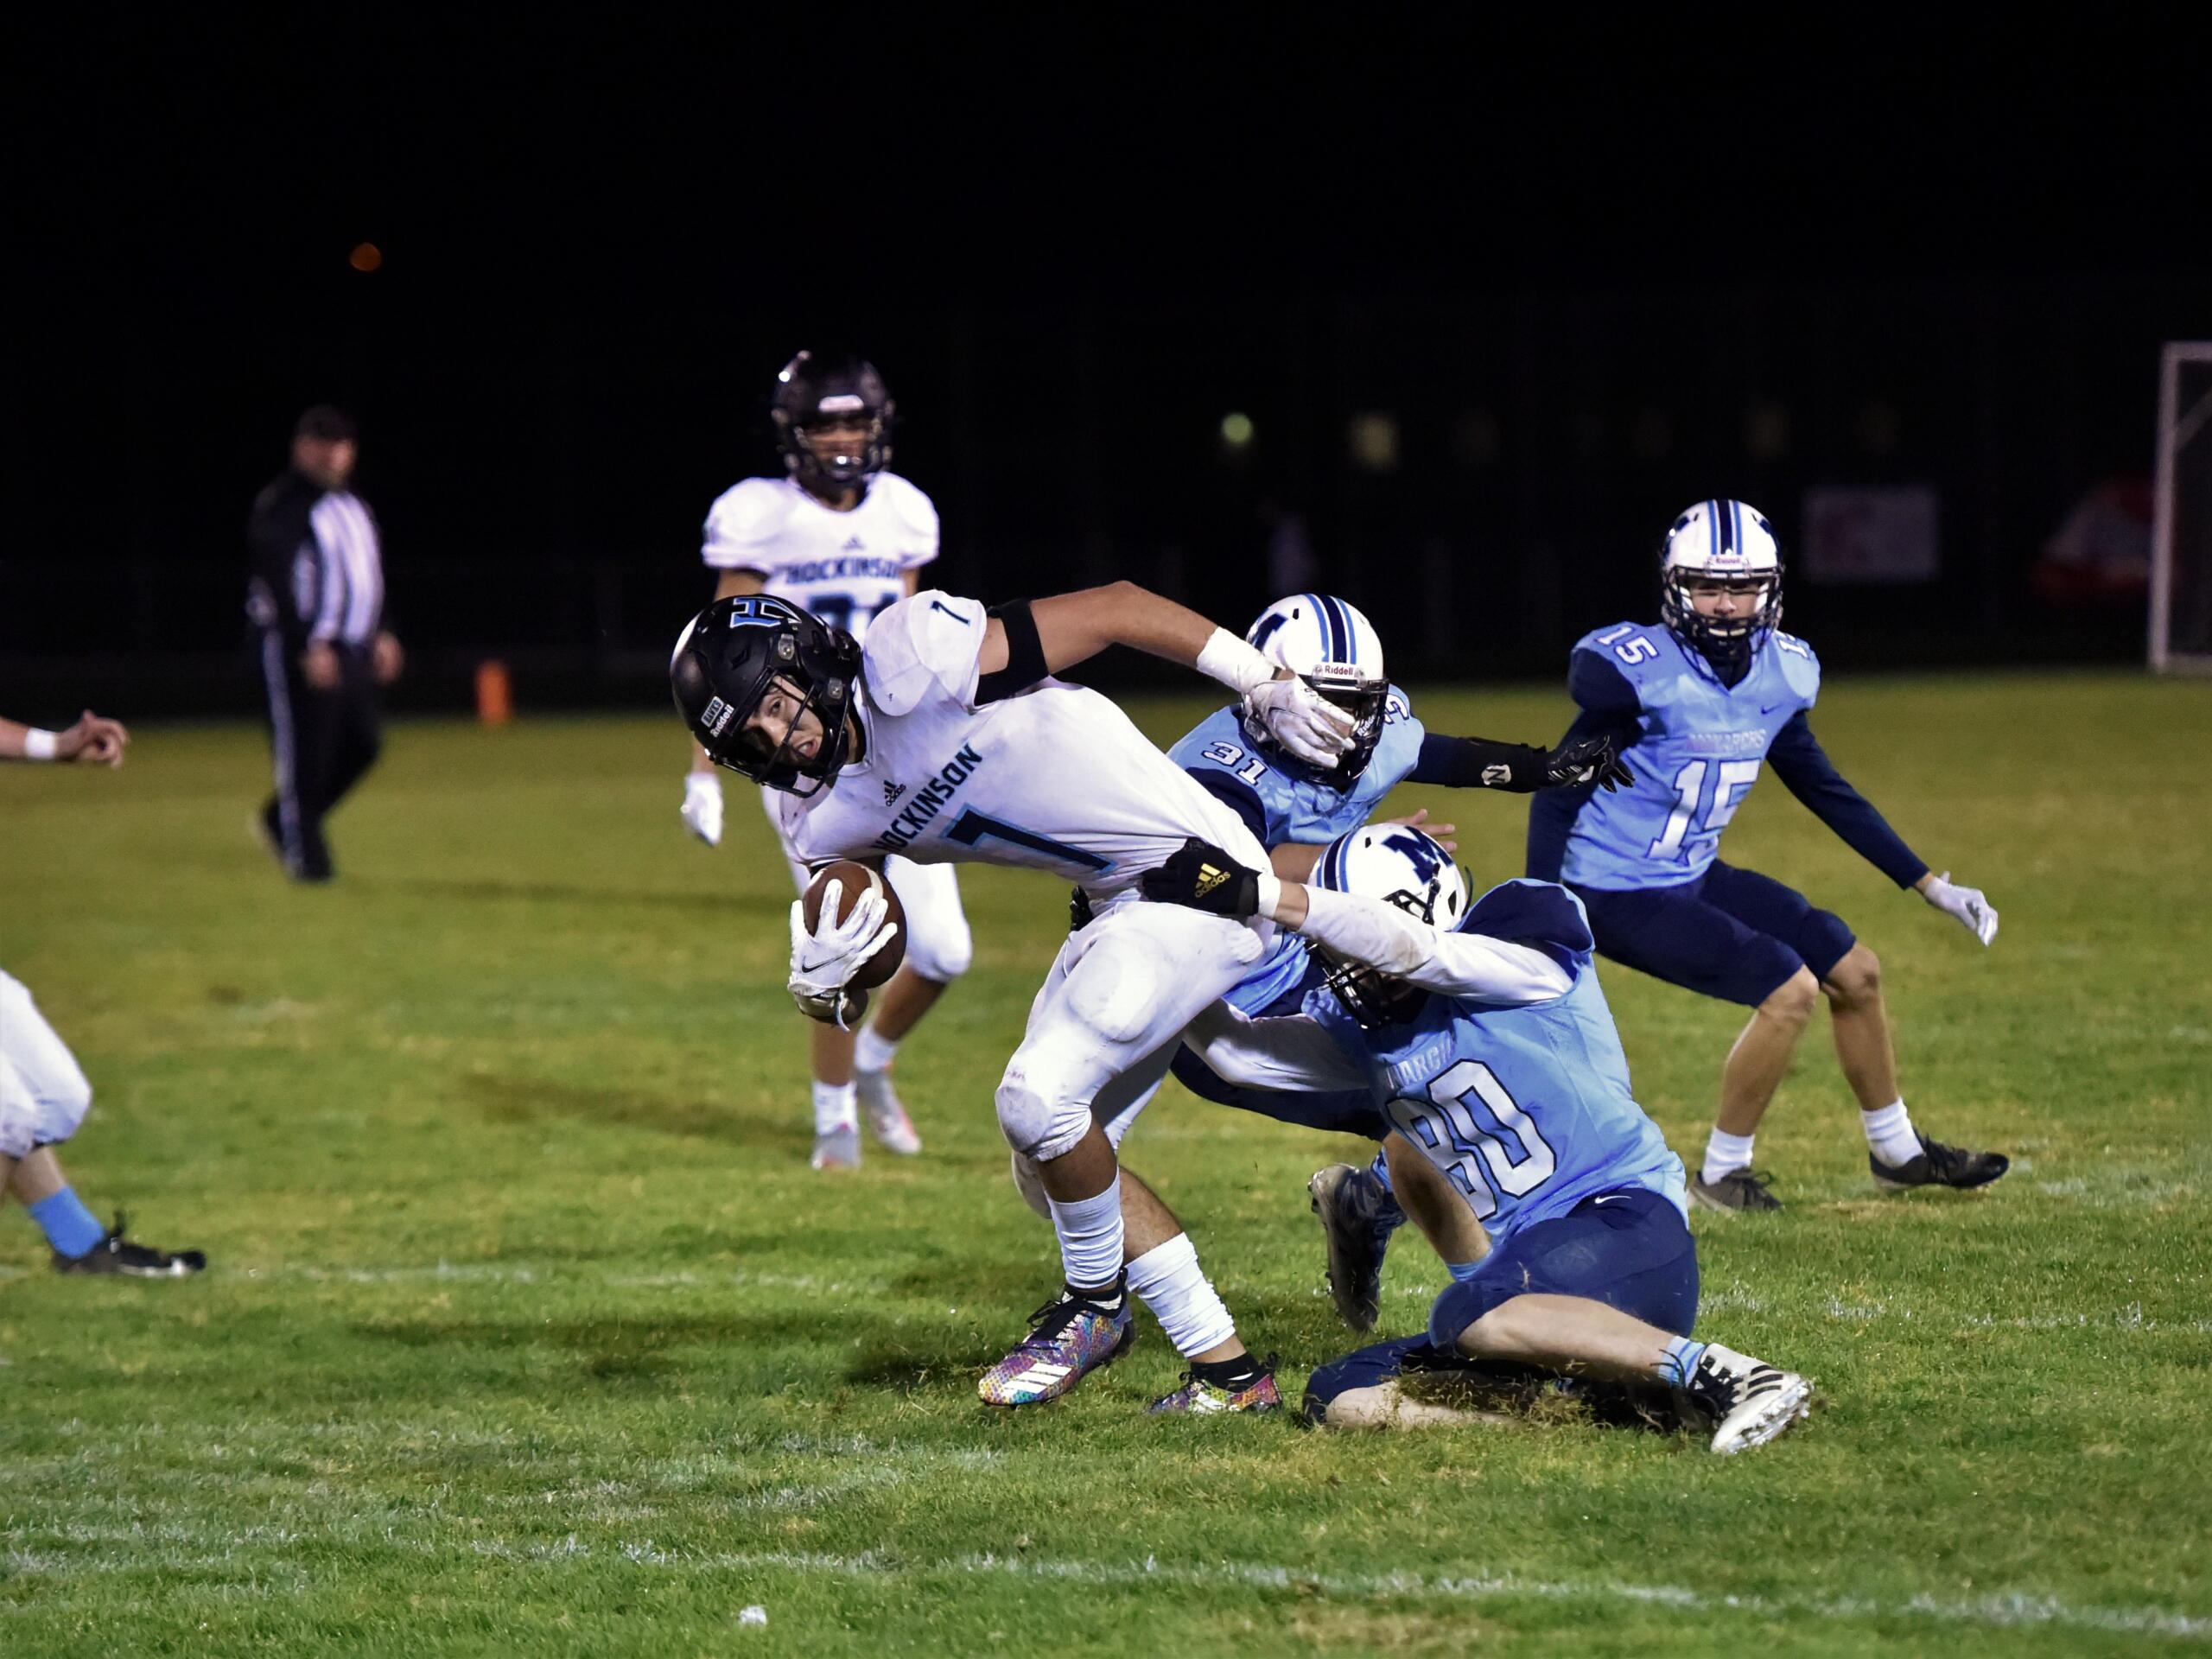 Hockinson’s Hale Prior (7) is spun around as he breaks free of a Mark Morris defender on Friday, Oct. 15, in Longview.